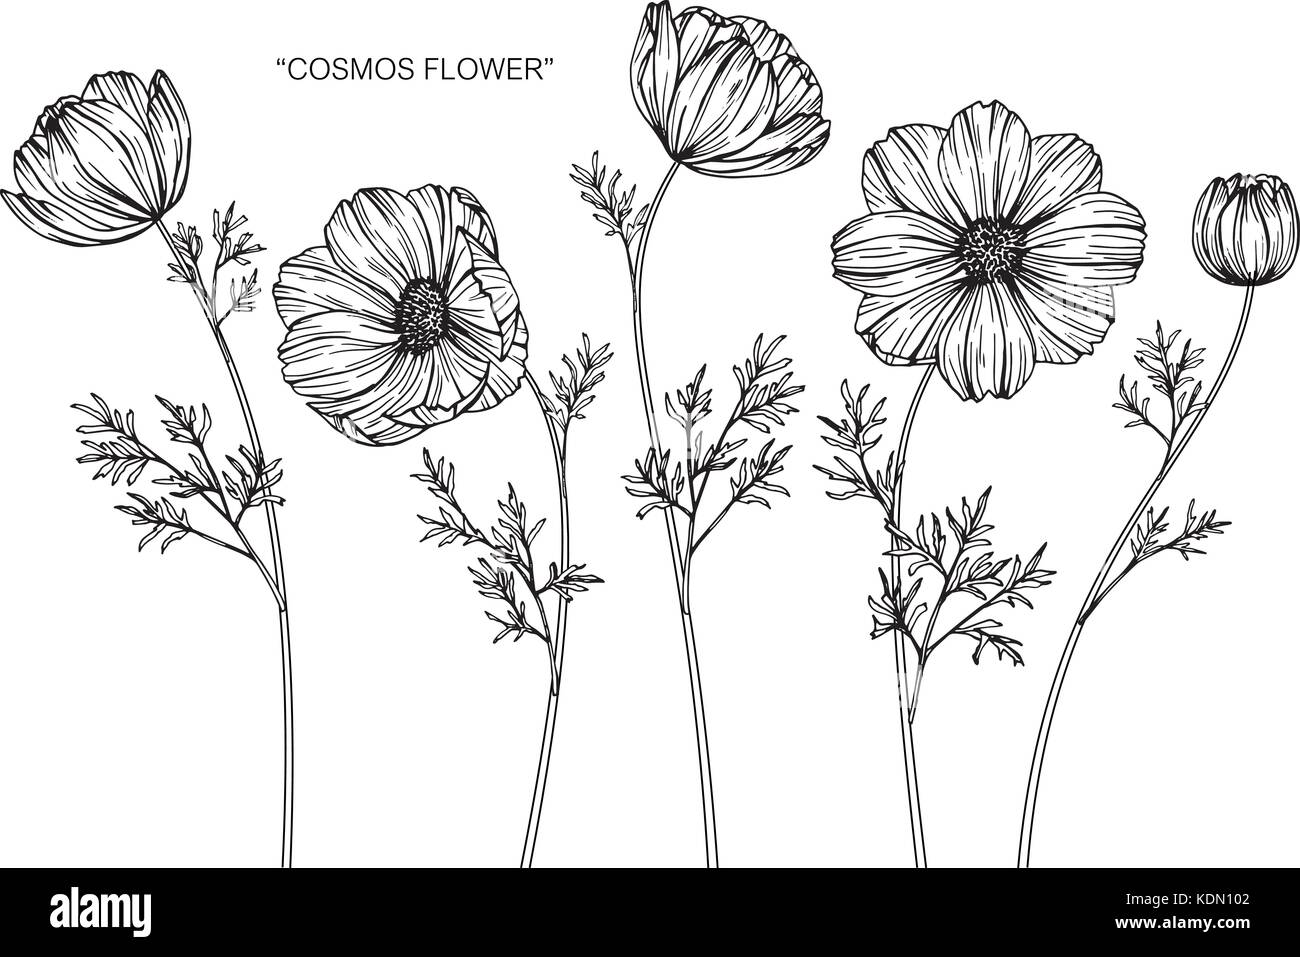 Cosmos Flower Drawing Illustration Black And White With Line Art Stock Vector Image Art Alamy